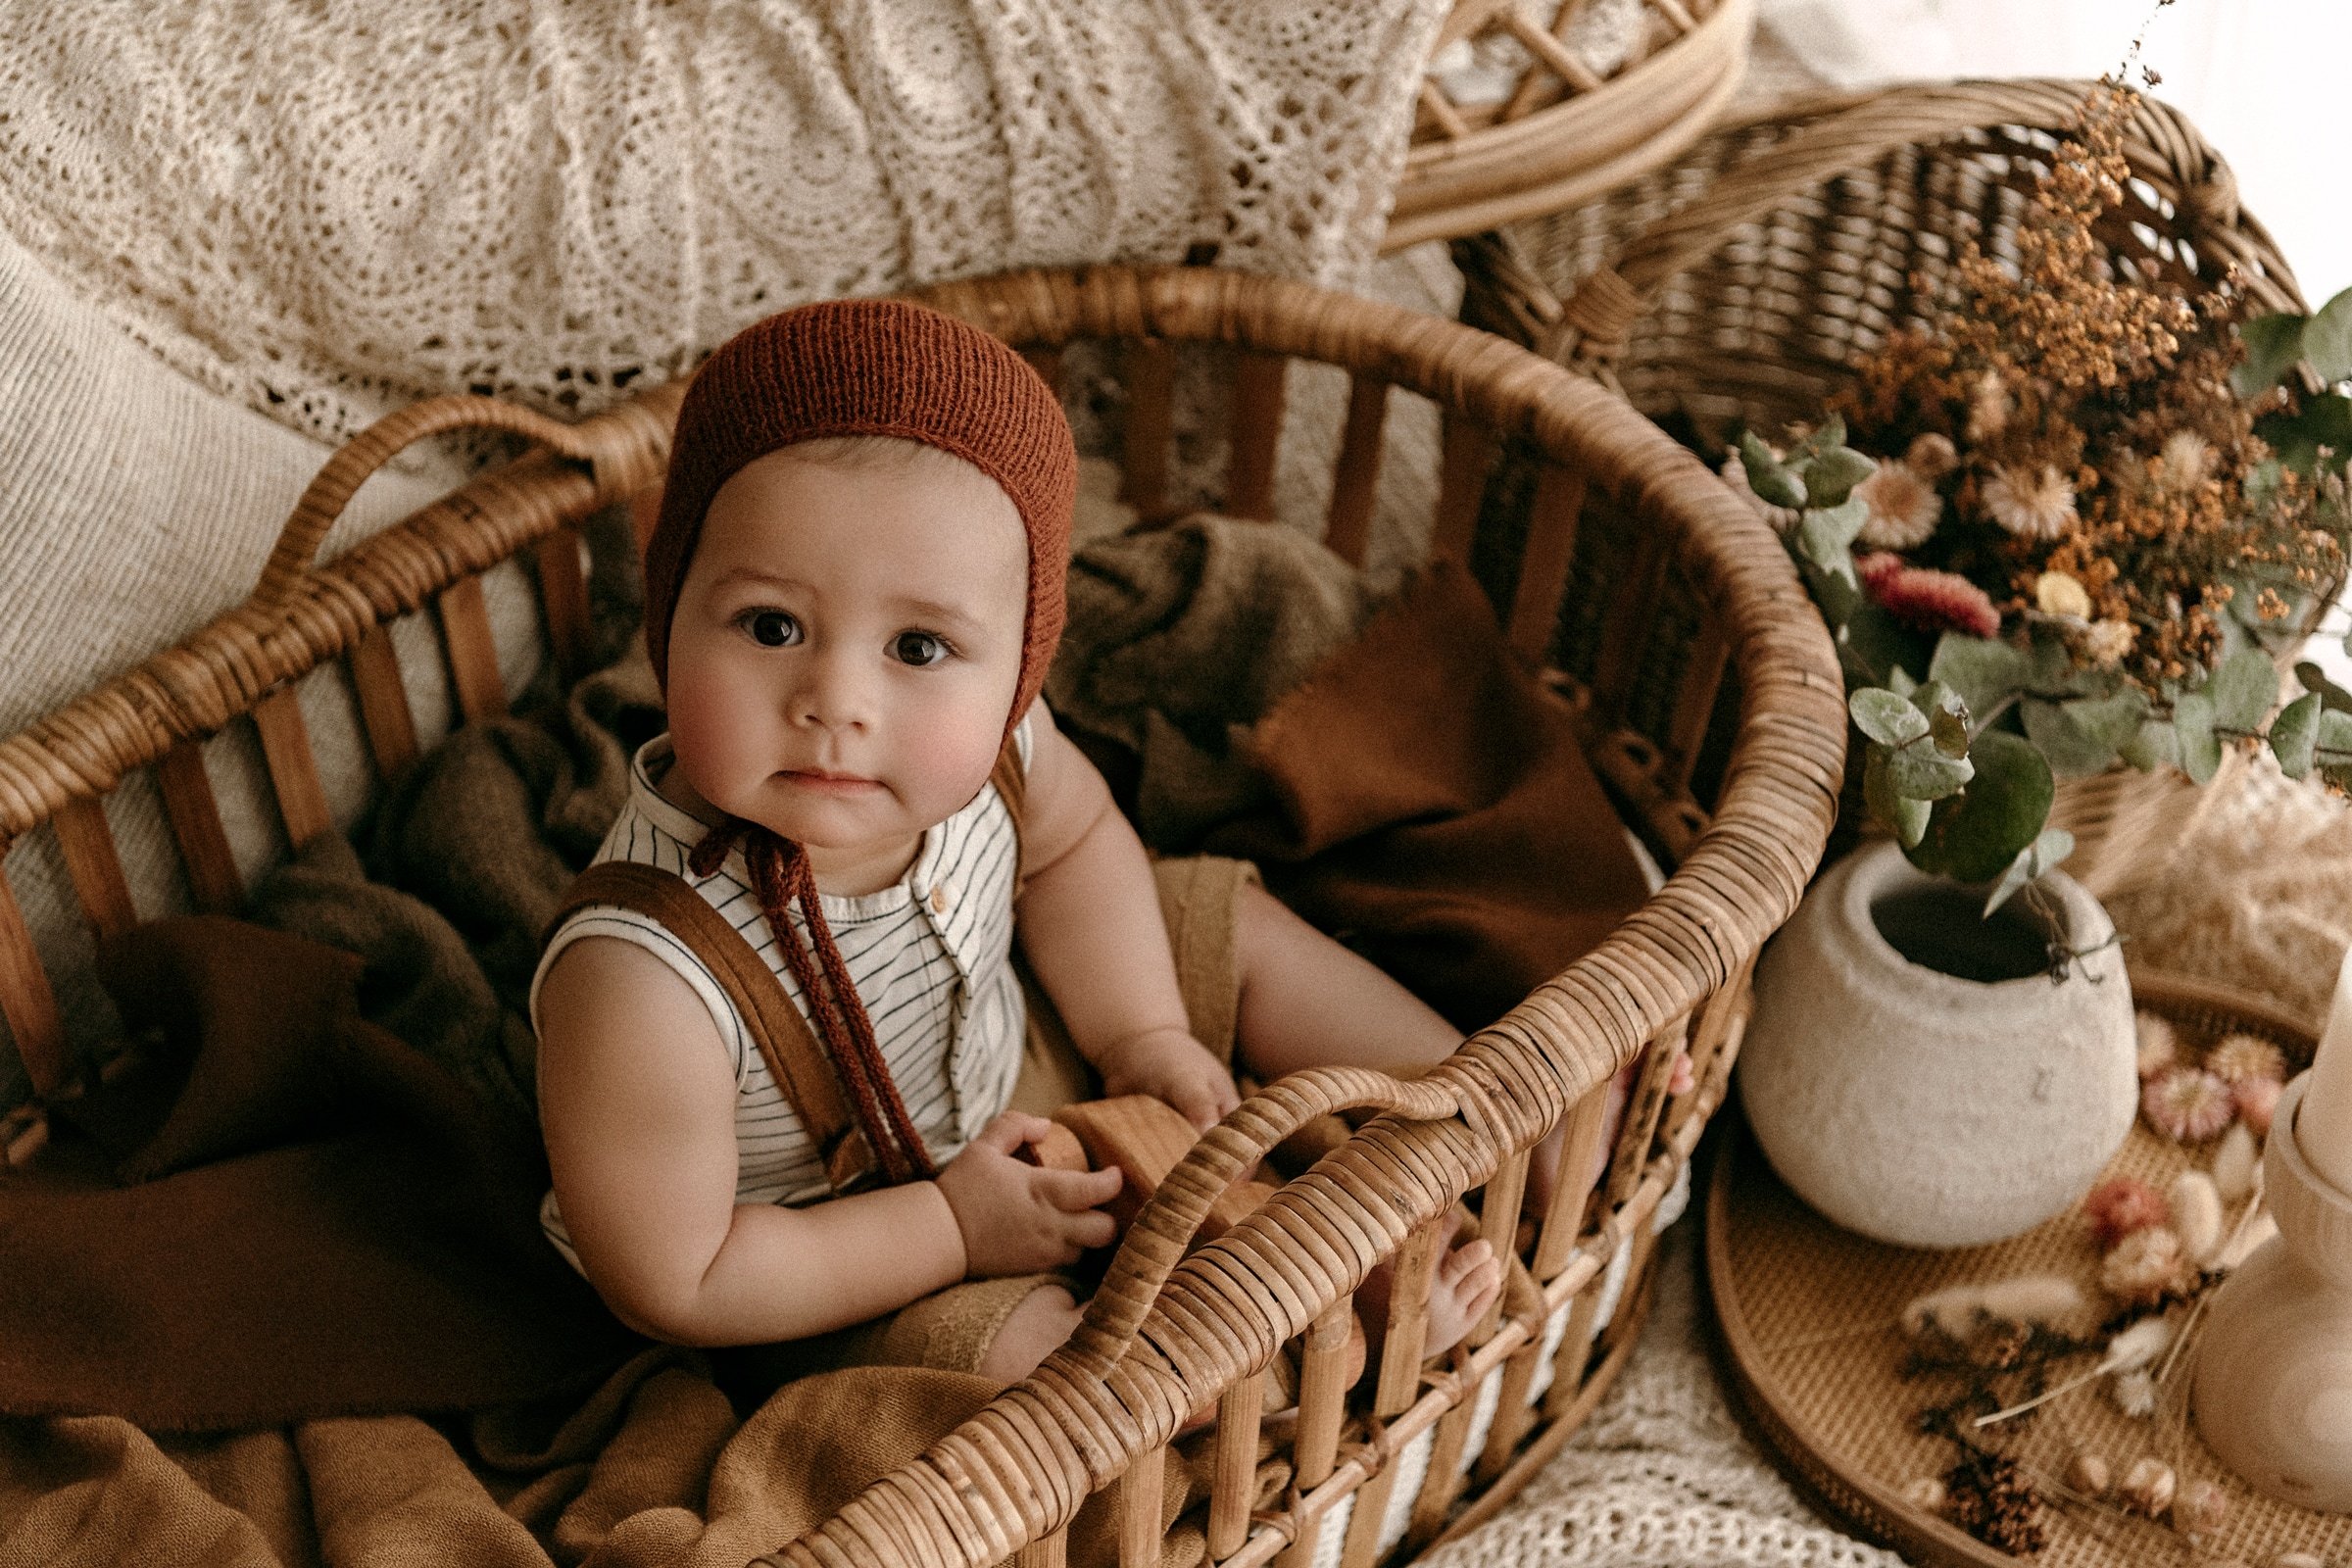 Melbourne Baby Photographer | Emma Pender Photography